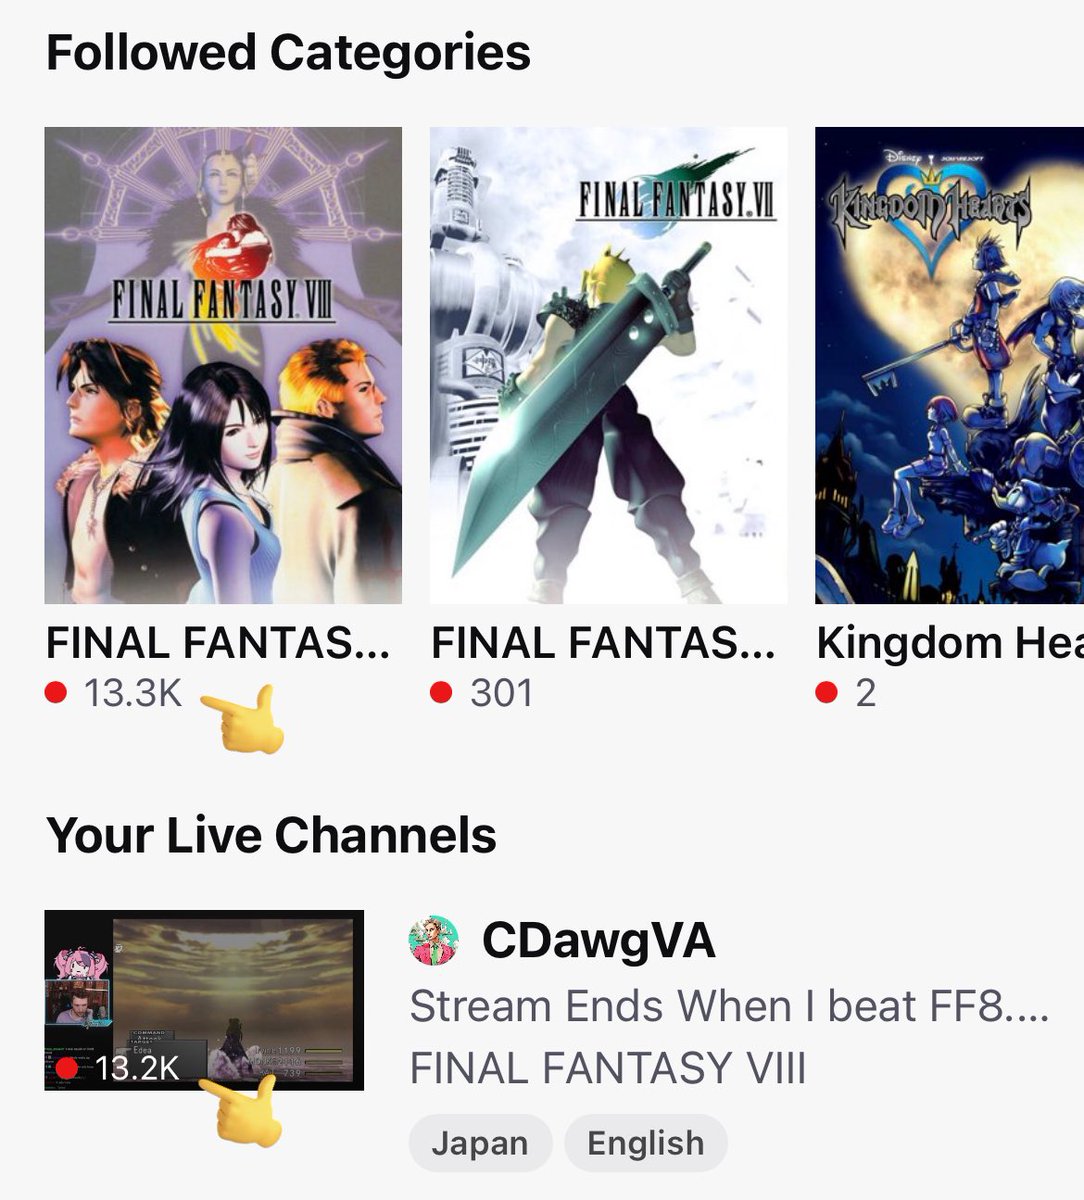 Final Fantasy 8 category on Twitch on fire today cuz my homie @CDawgVA is playing it and won’t stop until he’s done with the game 😂🔥

BASED and deserved (FF8 is actually my favorite Final Fantasy, and I hope more people will give it a chance) 🙌